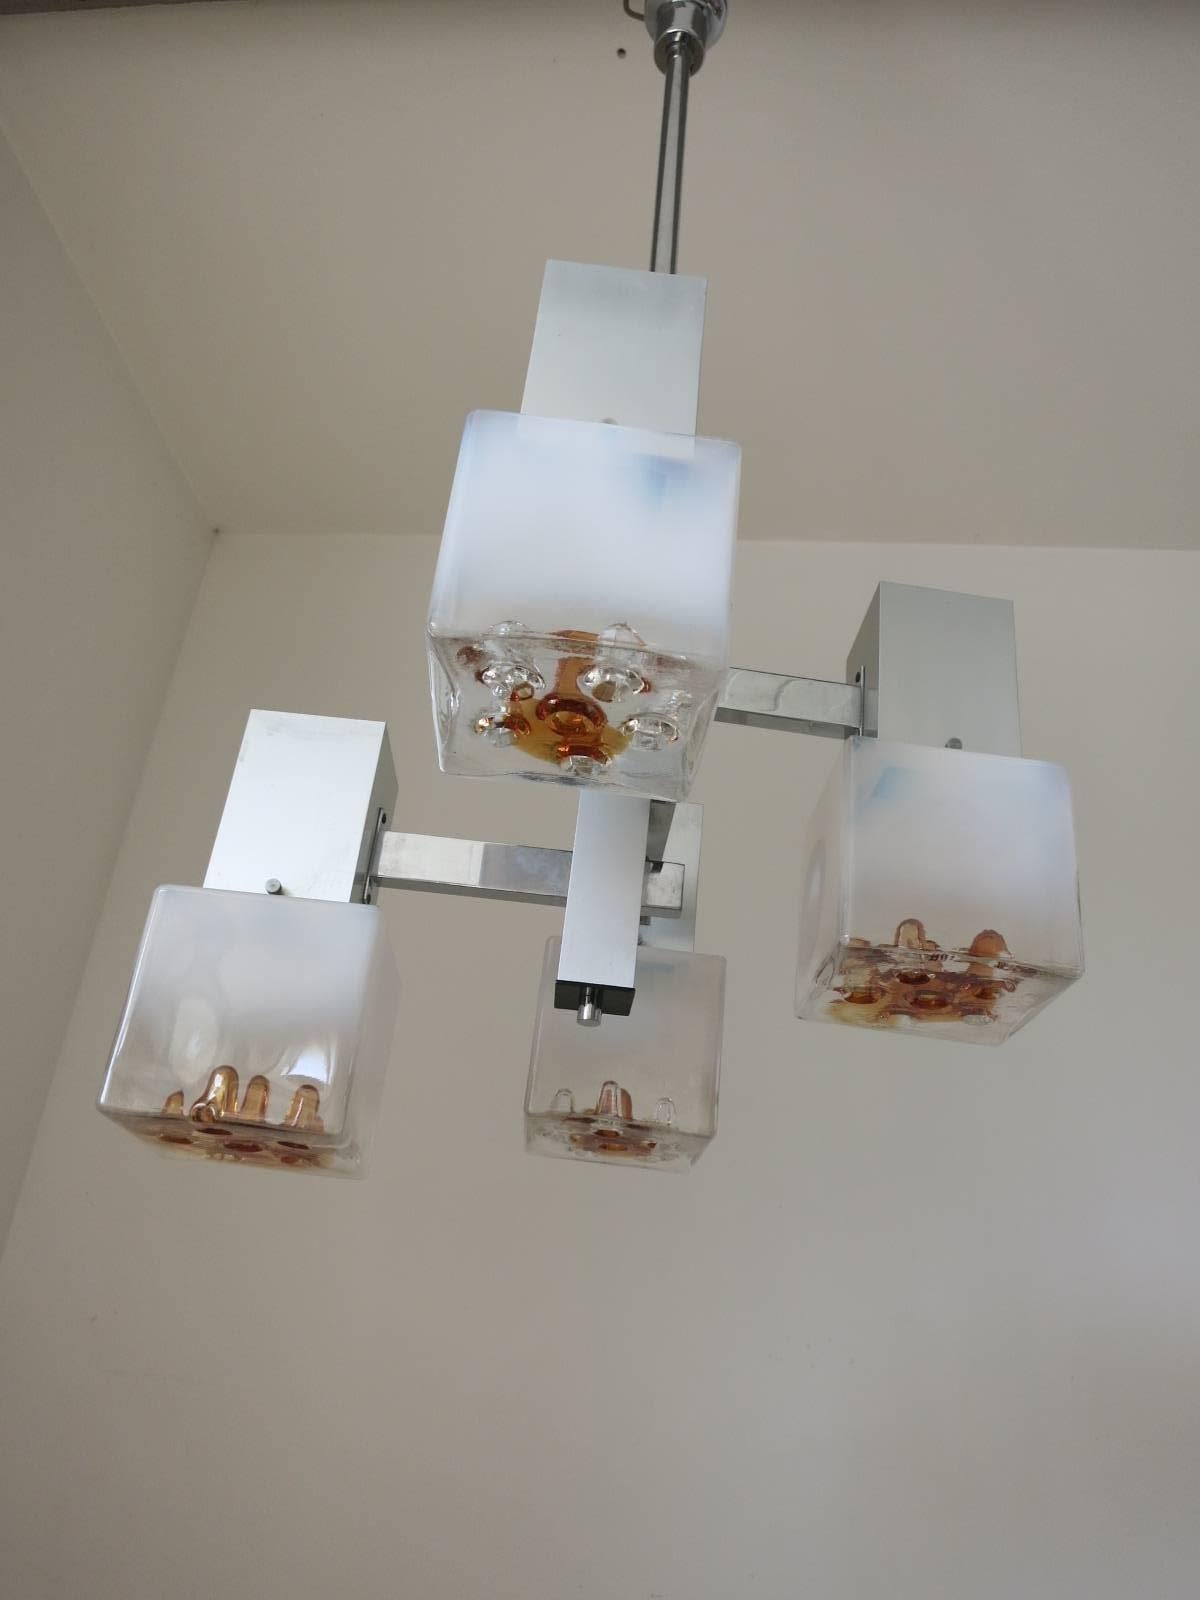 Vintage Italian pendant with lightly frosted Murano glass cubes and infused amber glass details, mounted geometrically on brushed chrome frame / Designed by Mazzega circa 1960’s / Made in Italy
4 lights / E12 or E14 type / max 40W each 
Diameter: 19